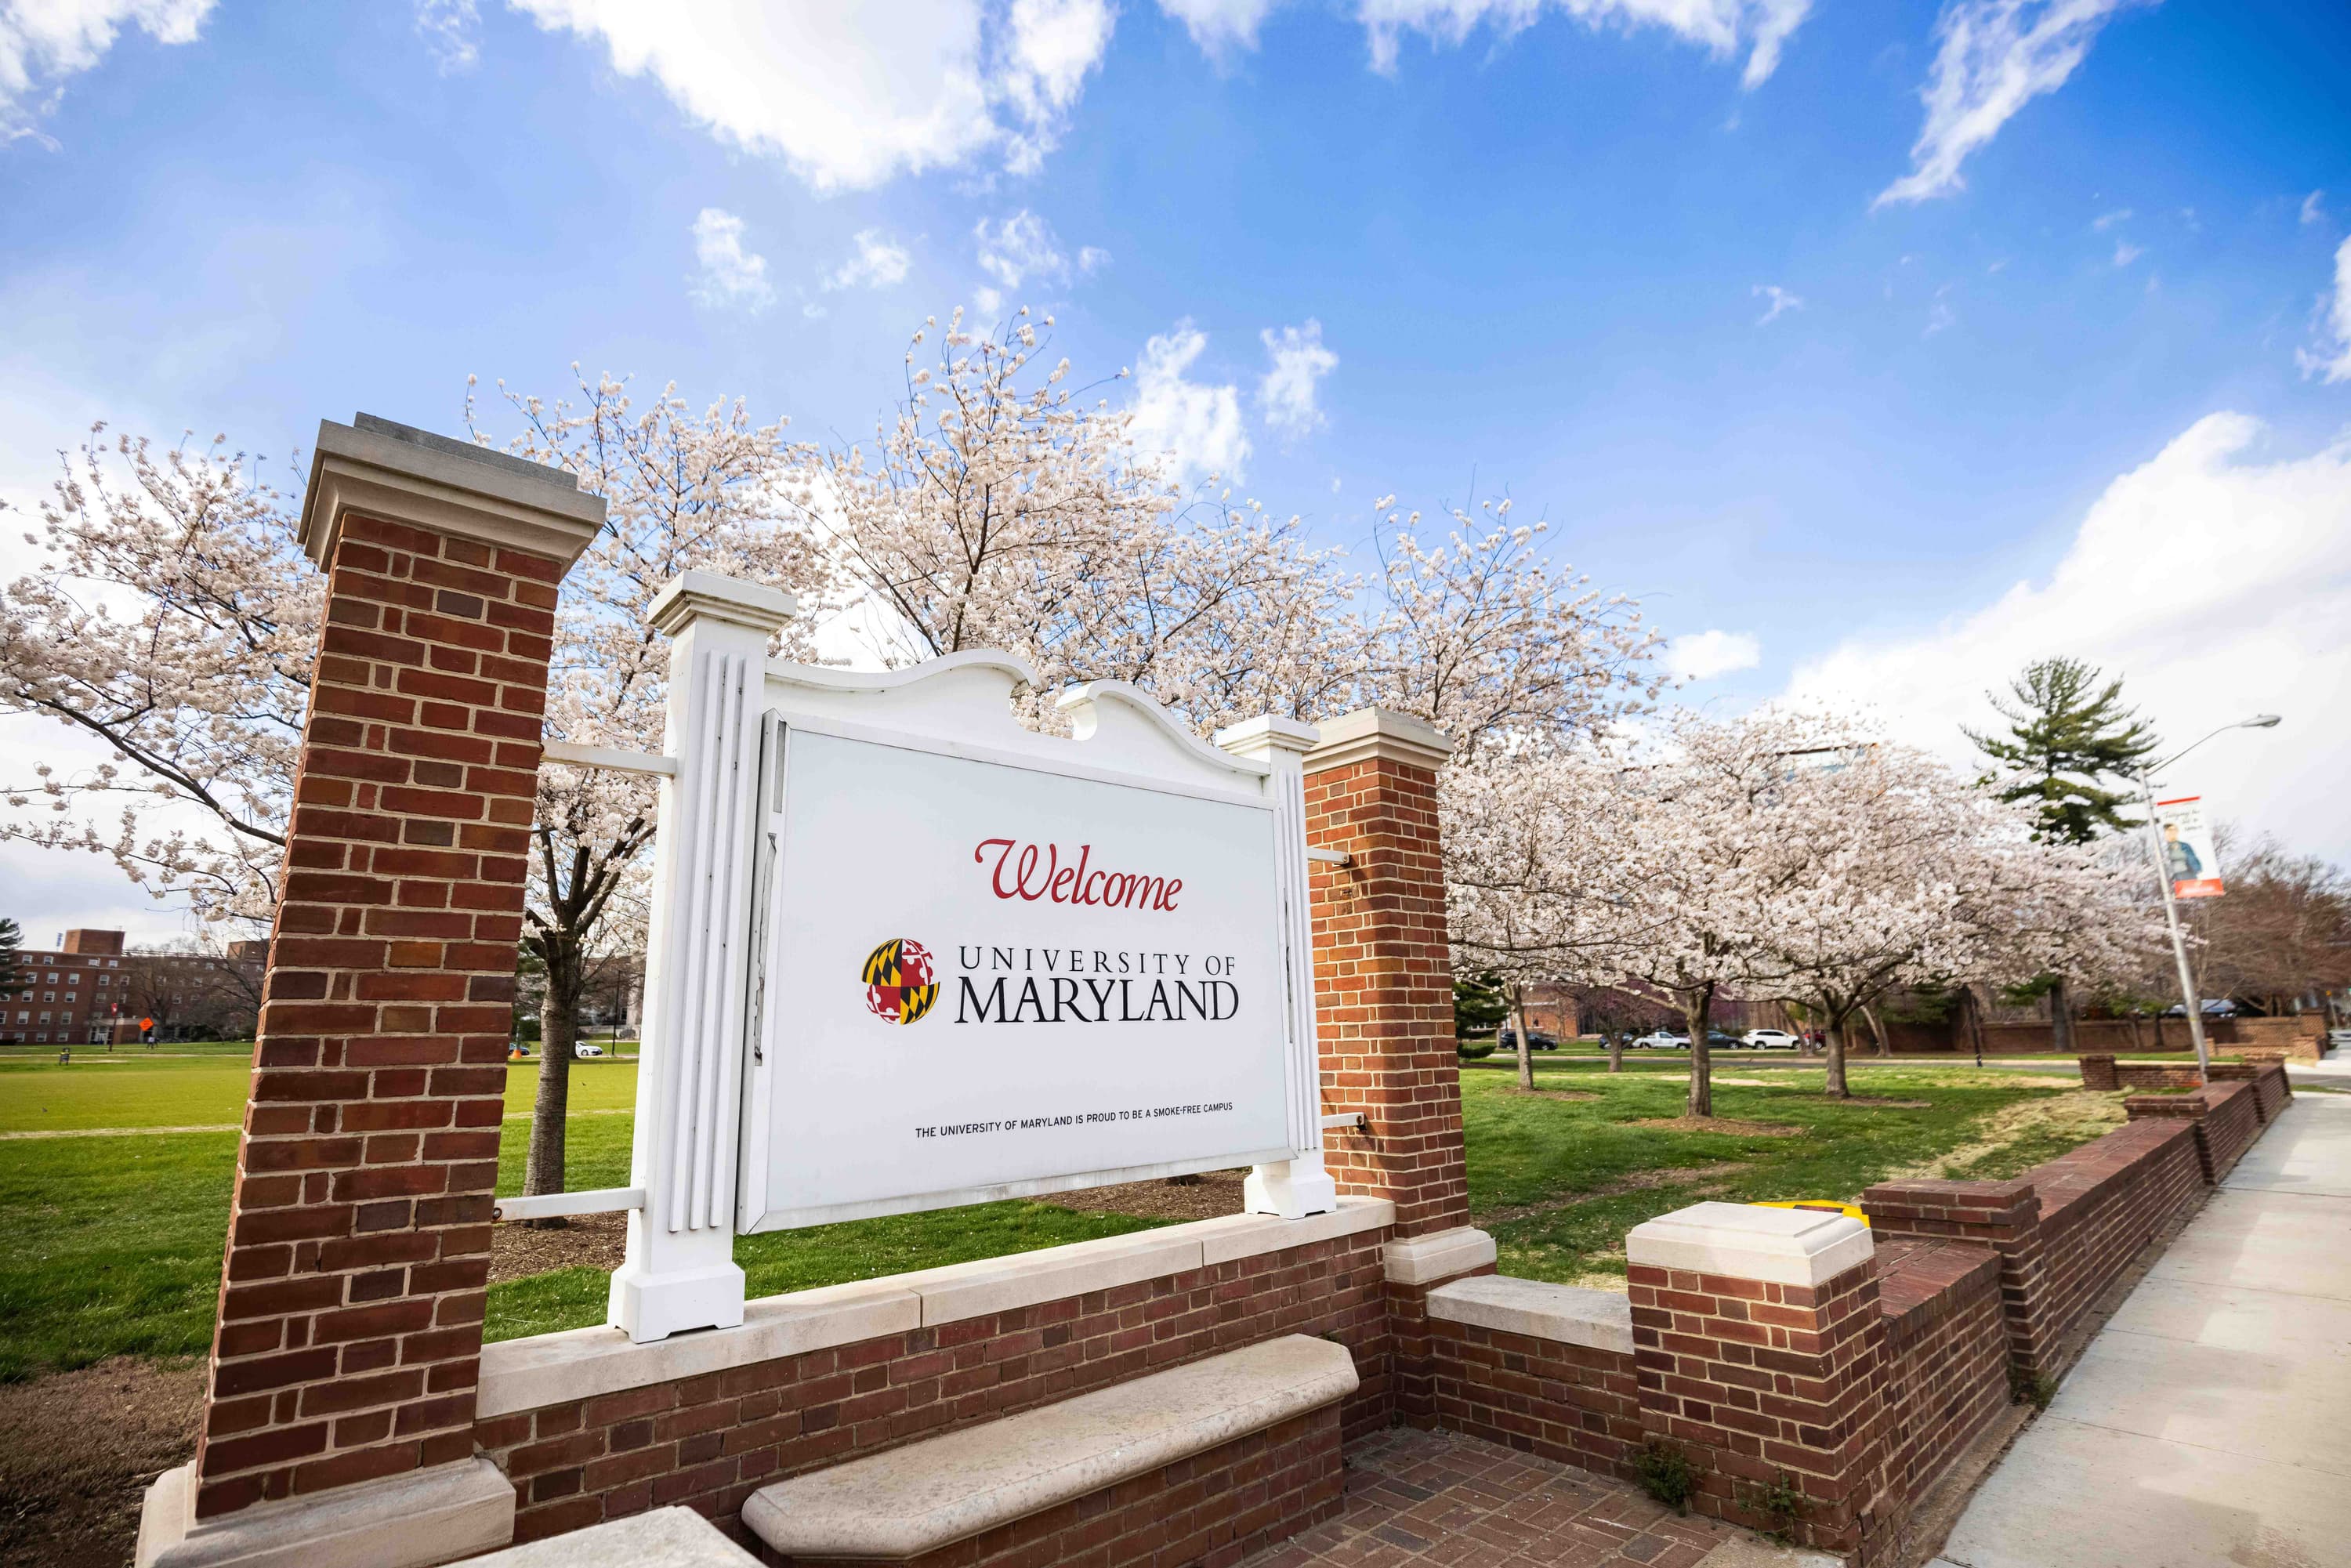 Welcome Sign for the University of Maryland with Blooming Cherry Blossom Trees in the Background